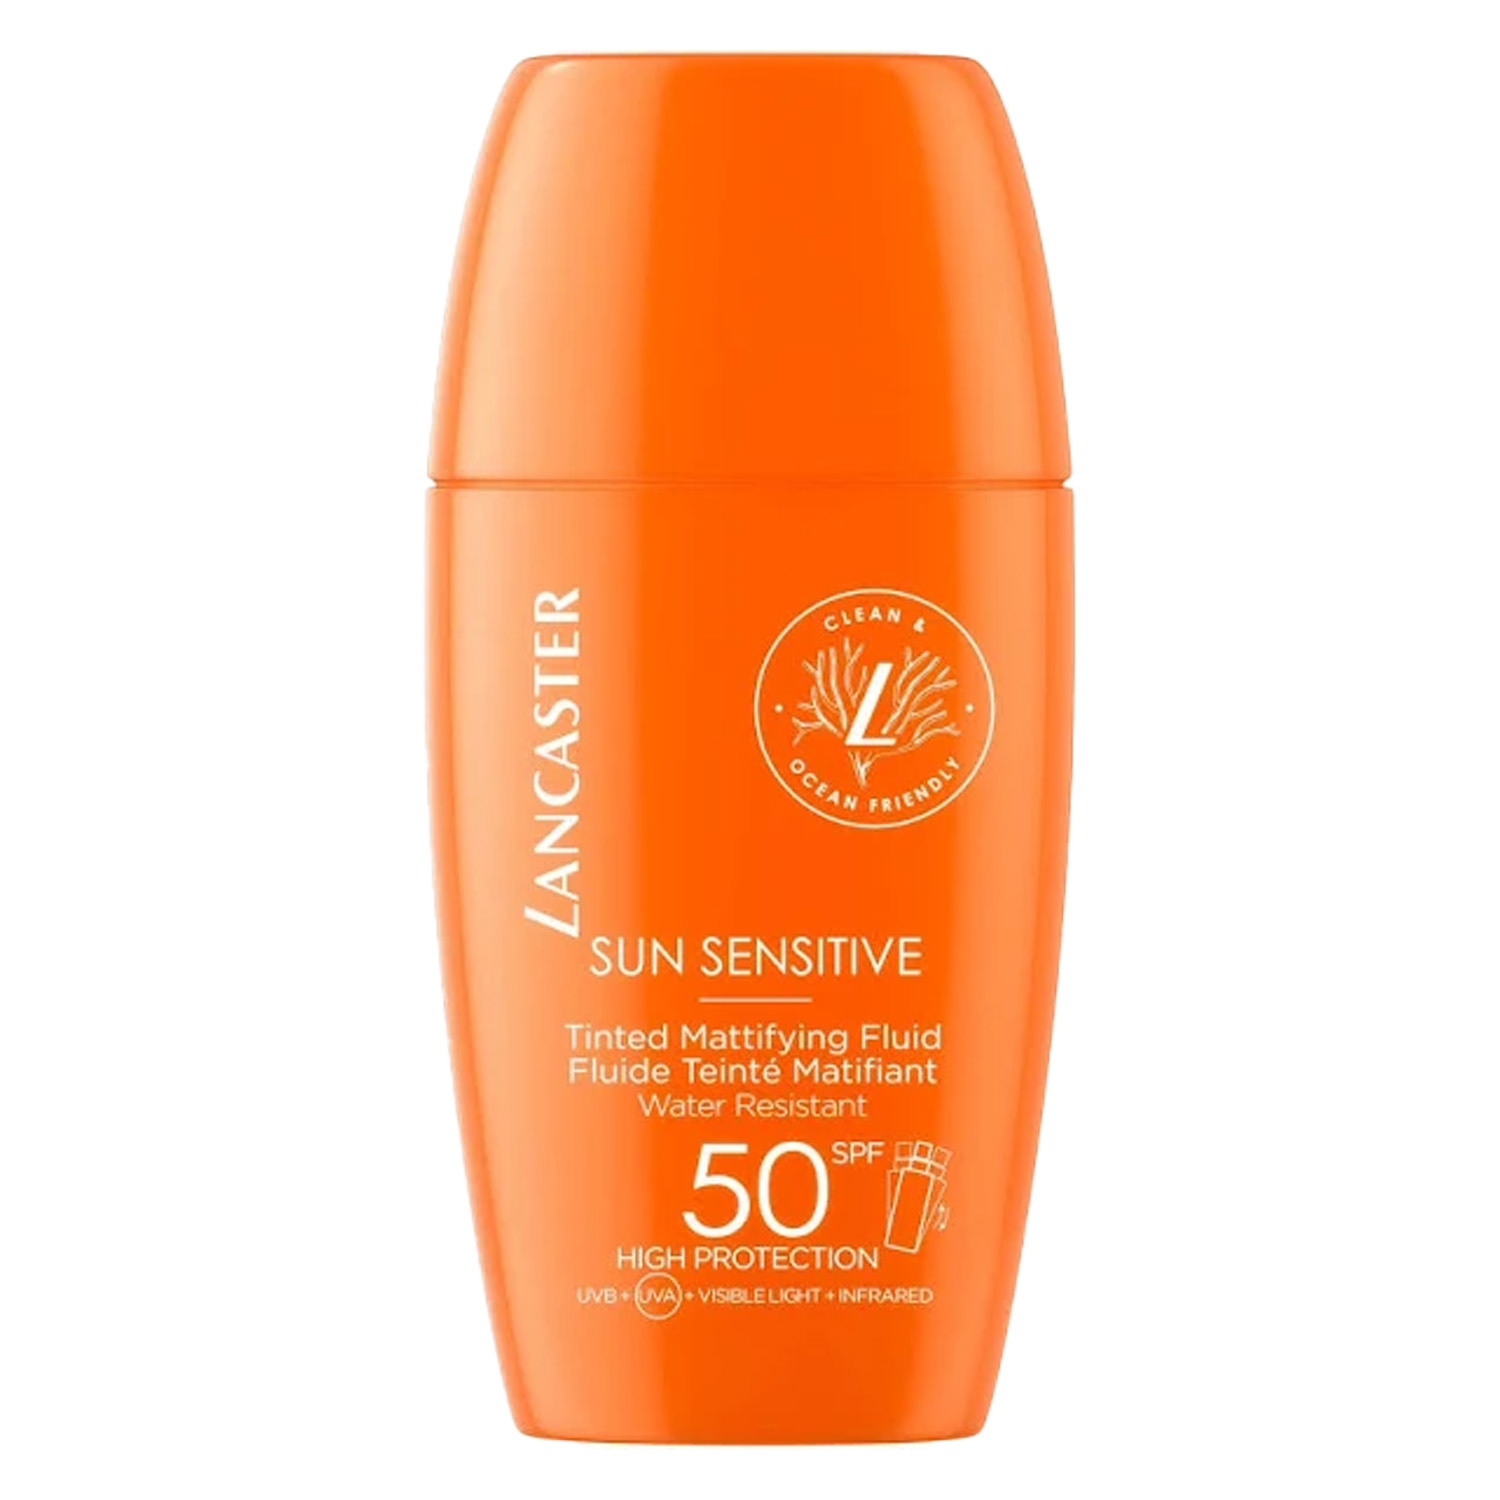 Product image from Sun Sensitive - Tinted Mattifying Fluid SPF50